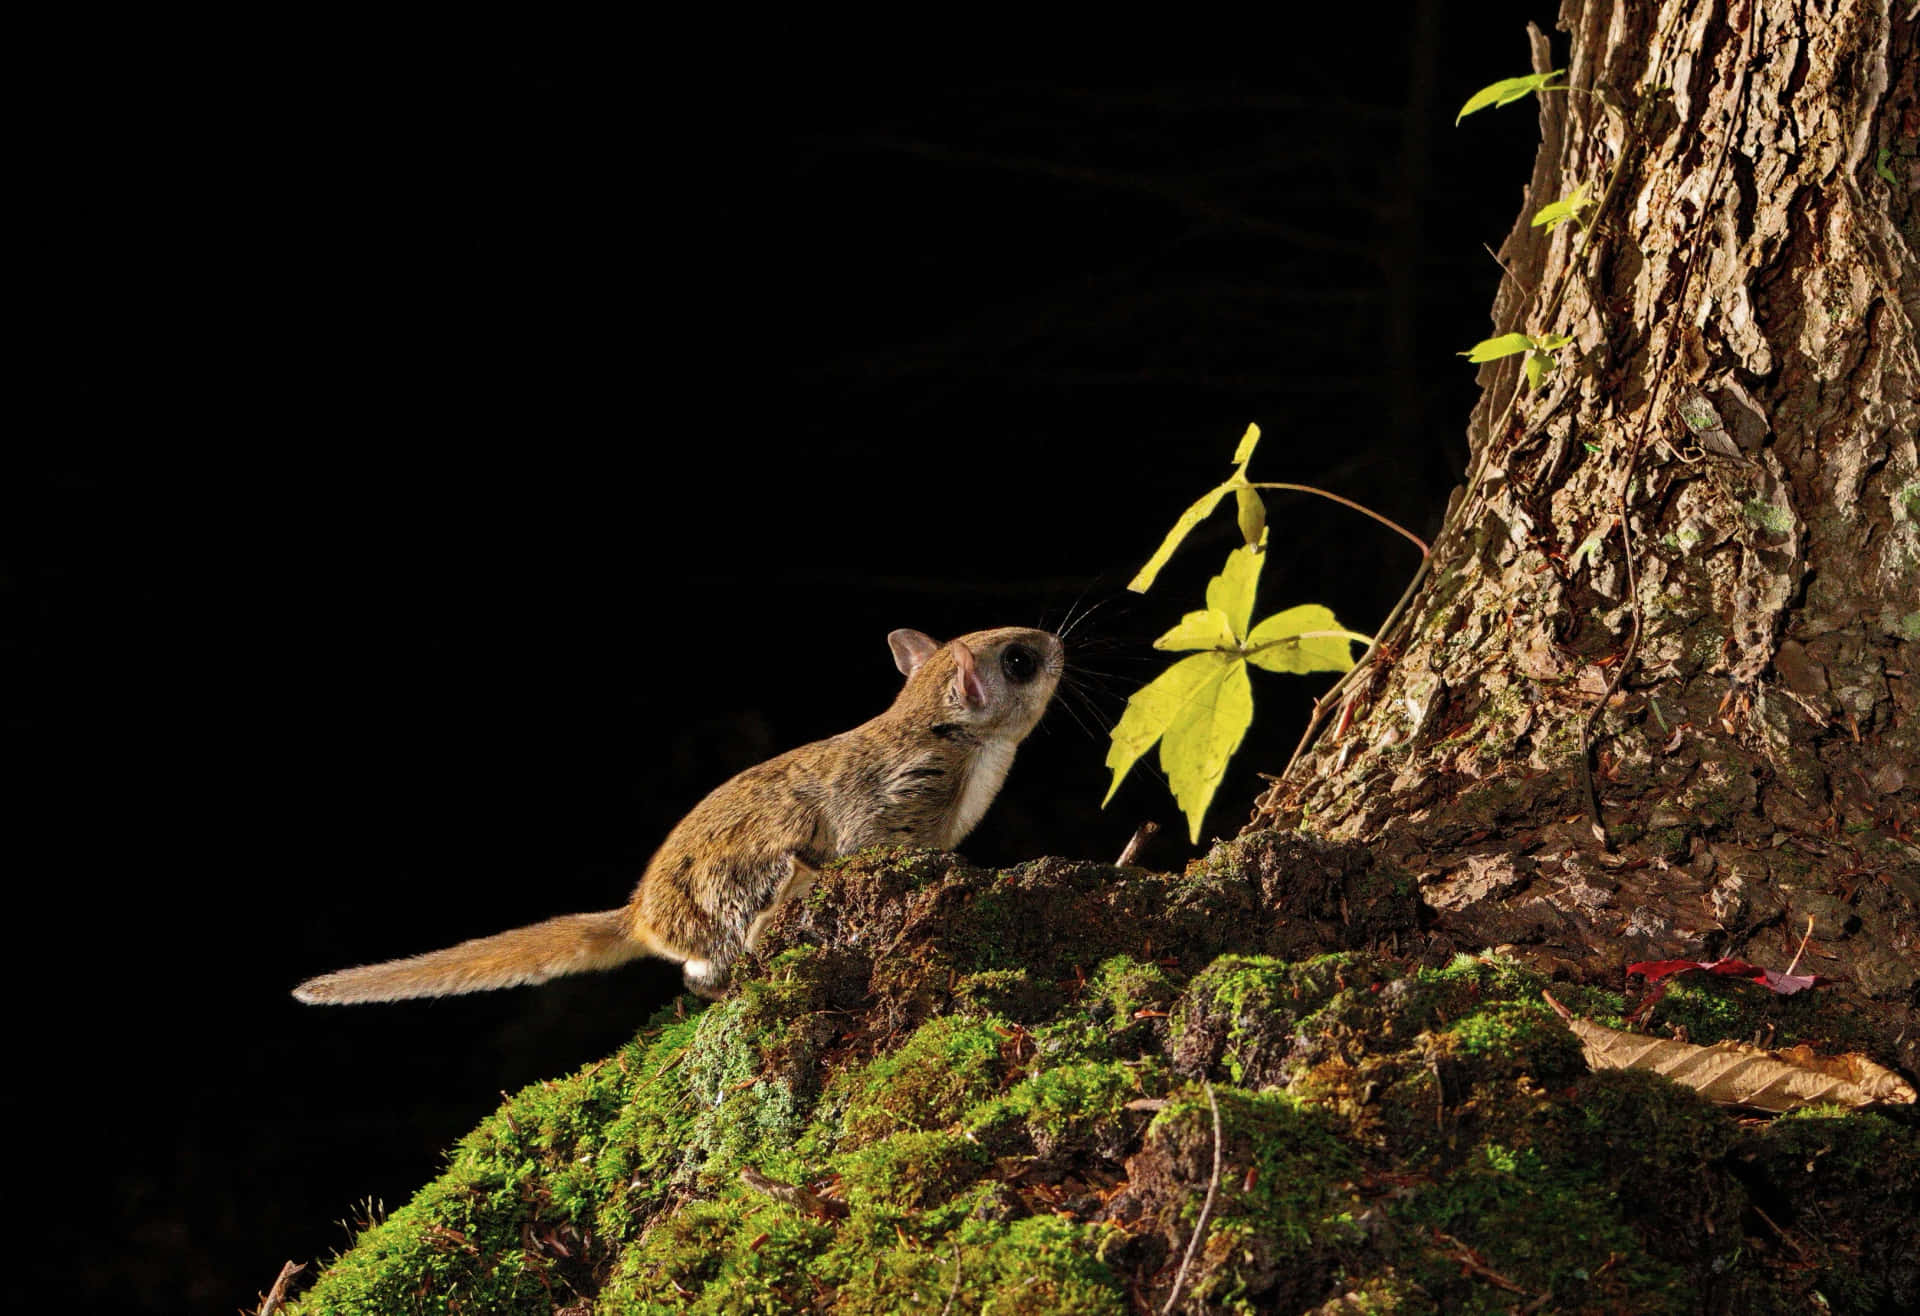 A flying squirrel soars through a starry night sky